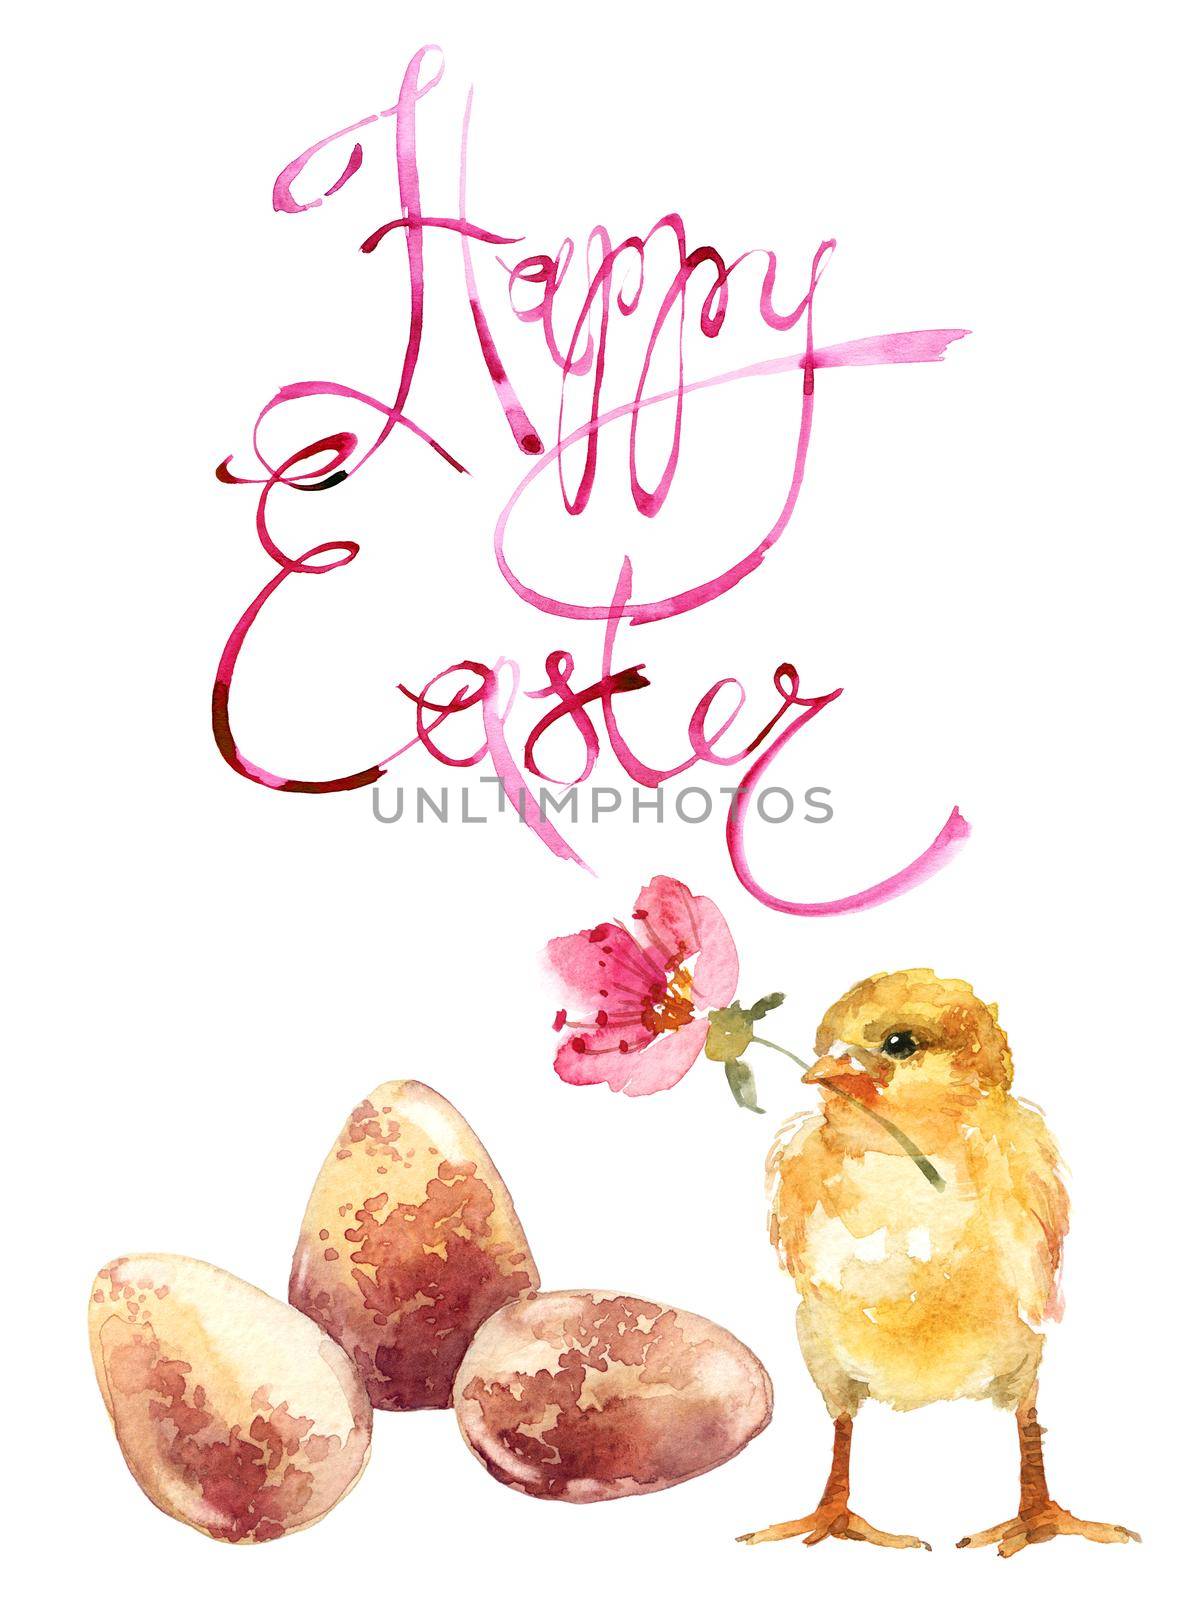 Watercolor illustrations of cute little chick with a flower in its beak and bird eggs. Happy easter greeting card design with calligraphy lettering.